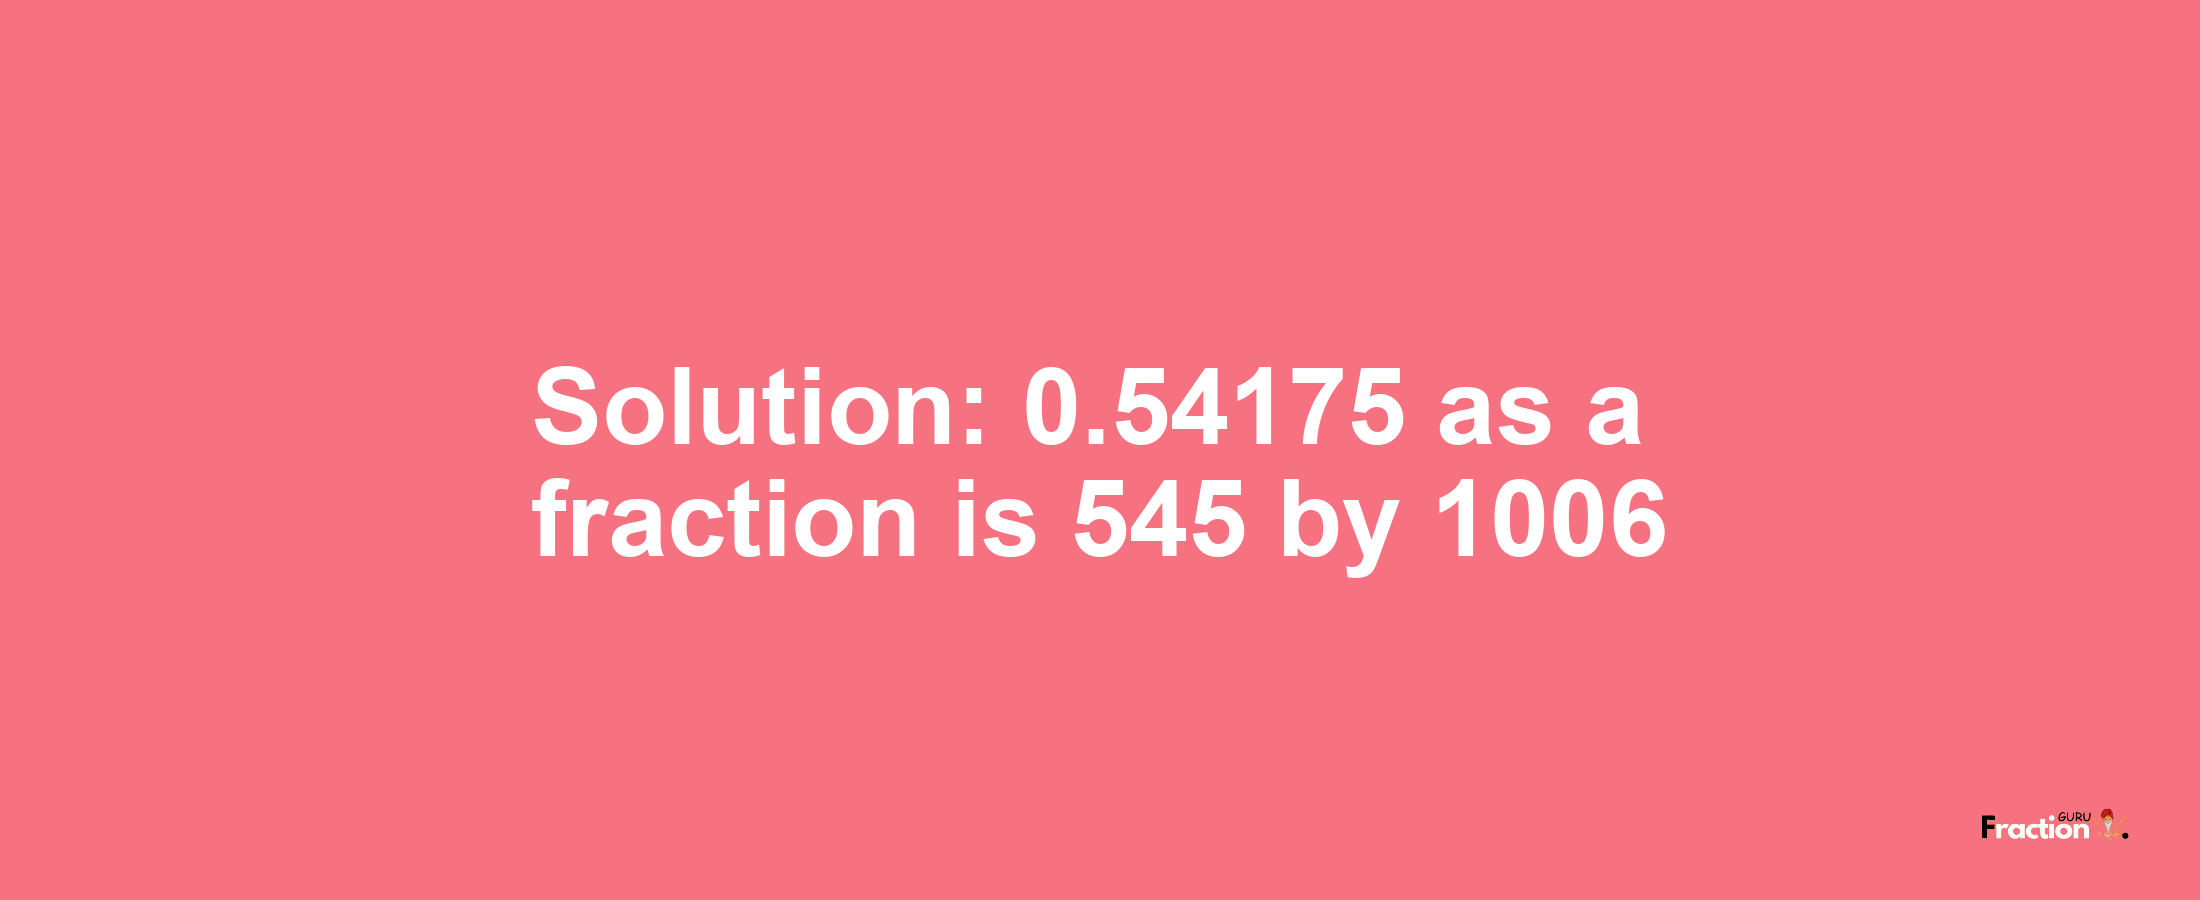 Solution:0.54175 as a fraction is 545/1006